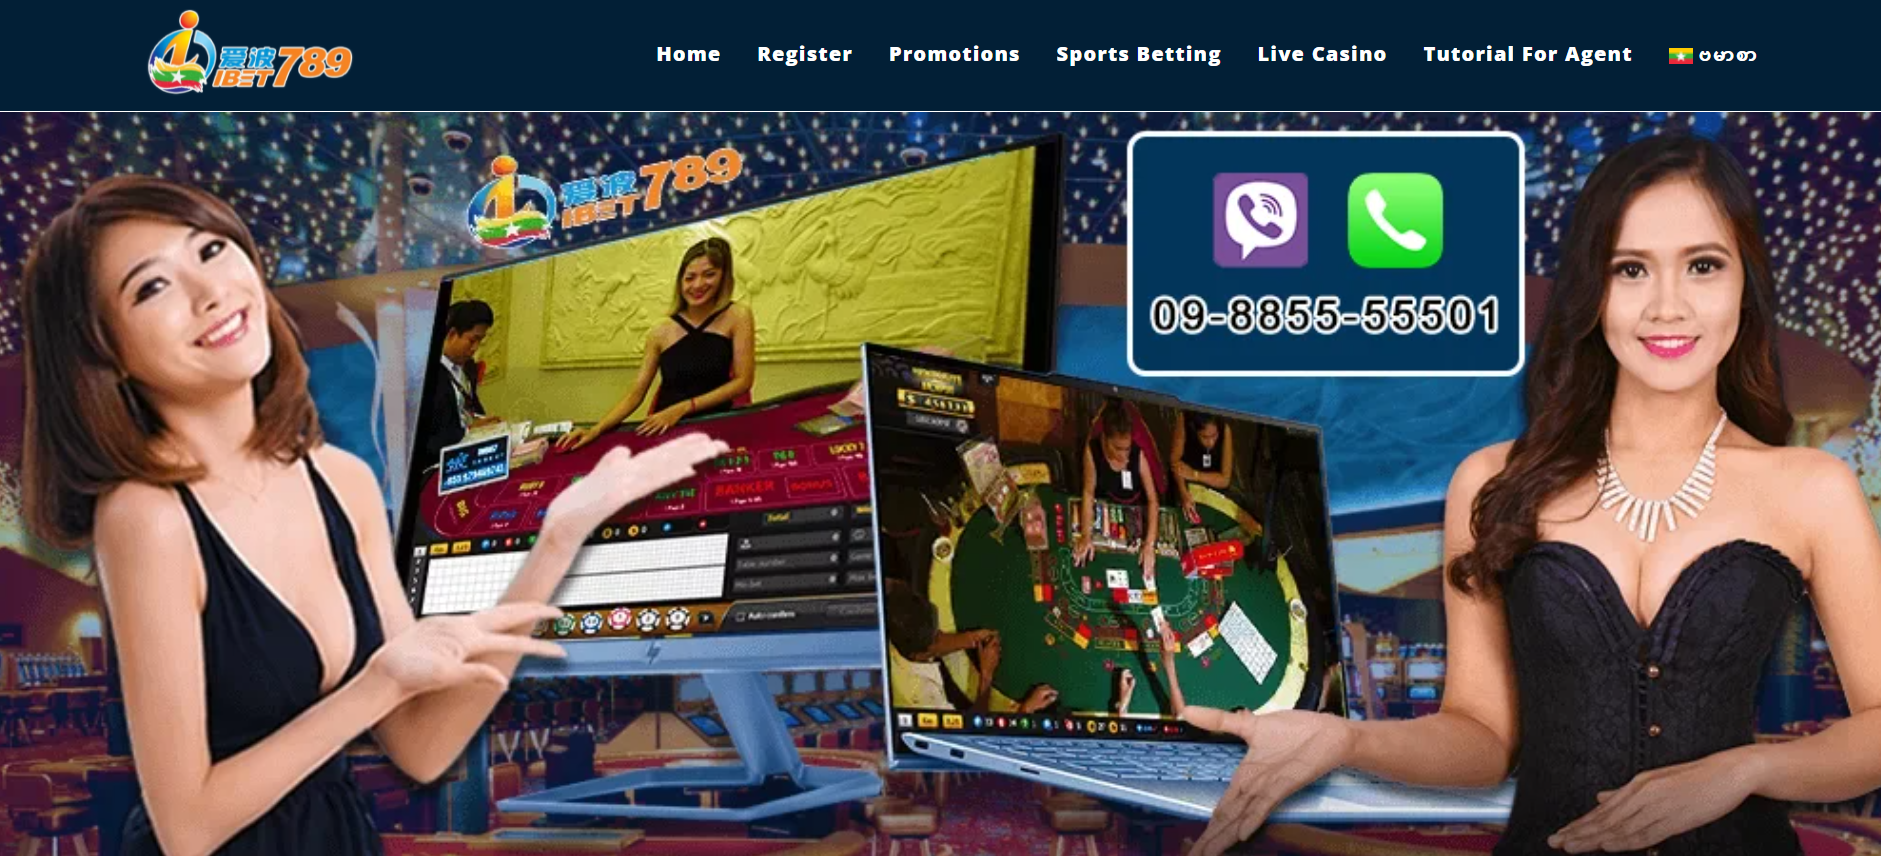 IBet789 casino games and live dealers